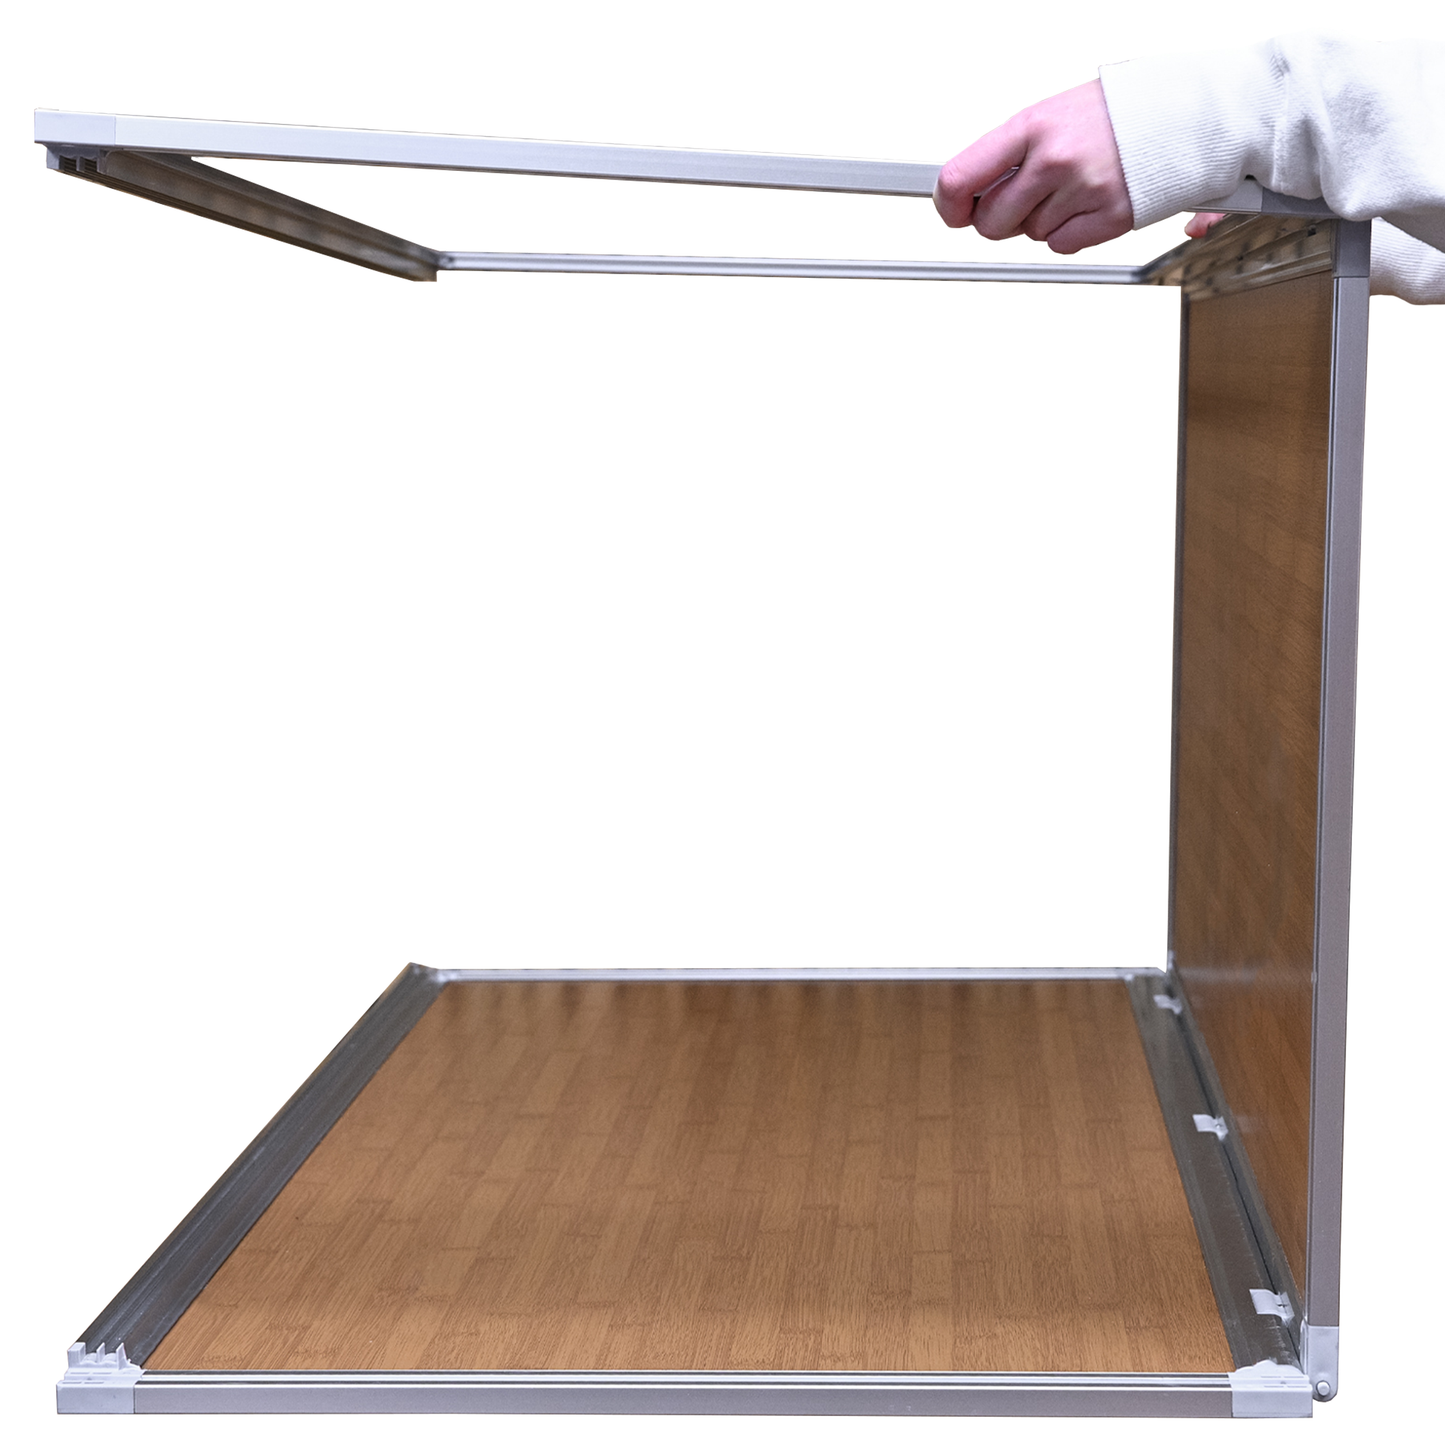 Meridian Cabinet Stand - for 4'x2' based Meridian enclosures